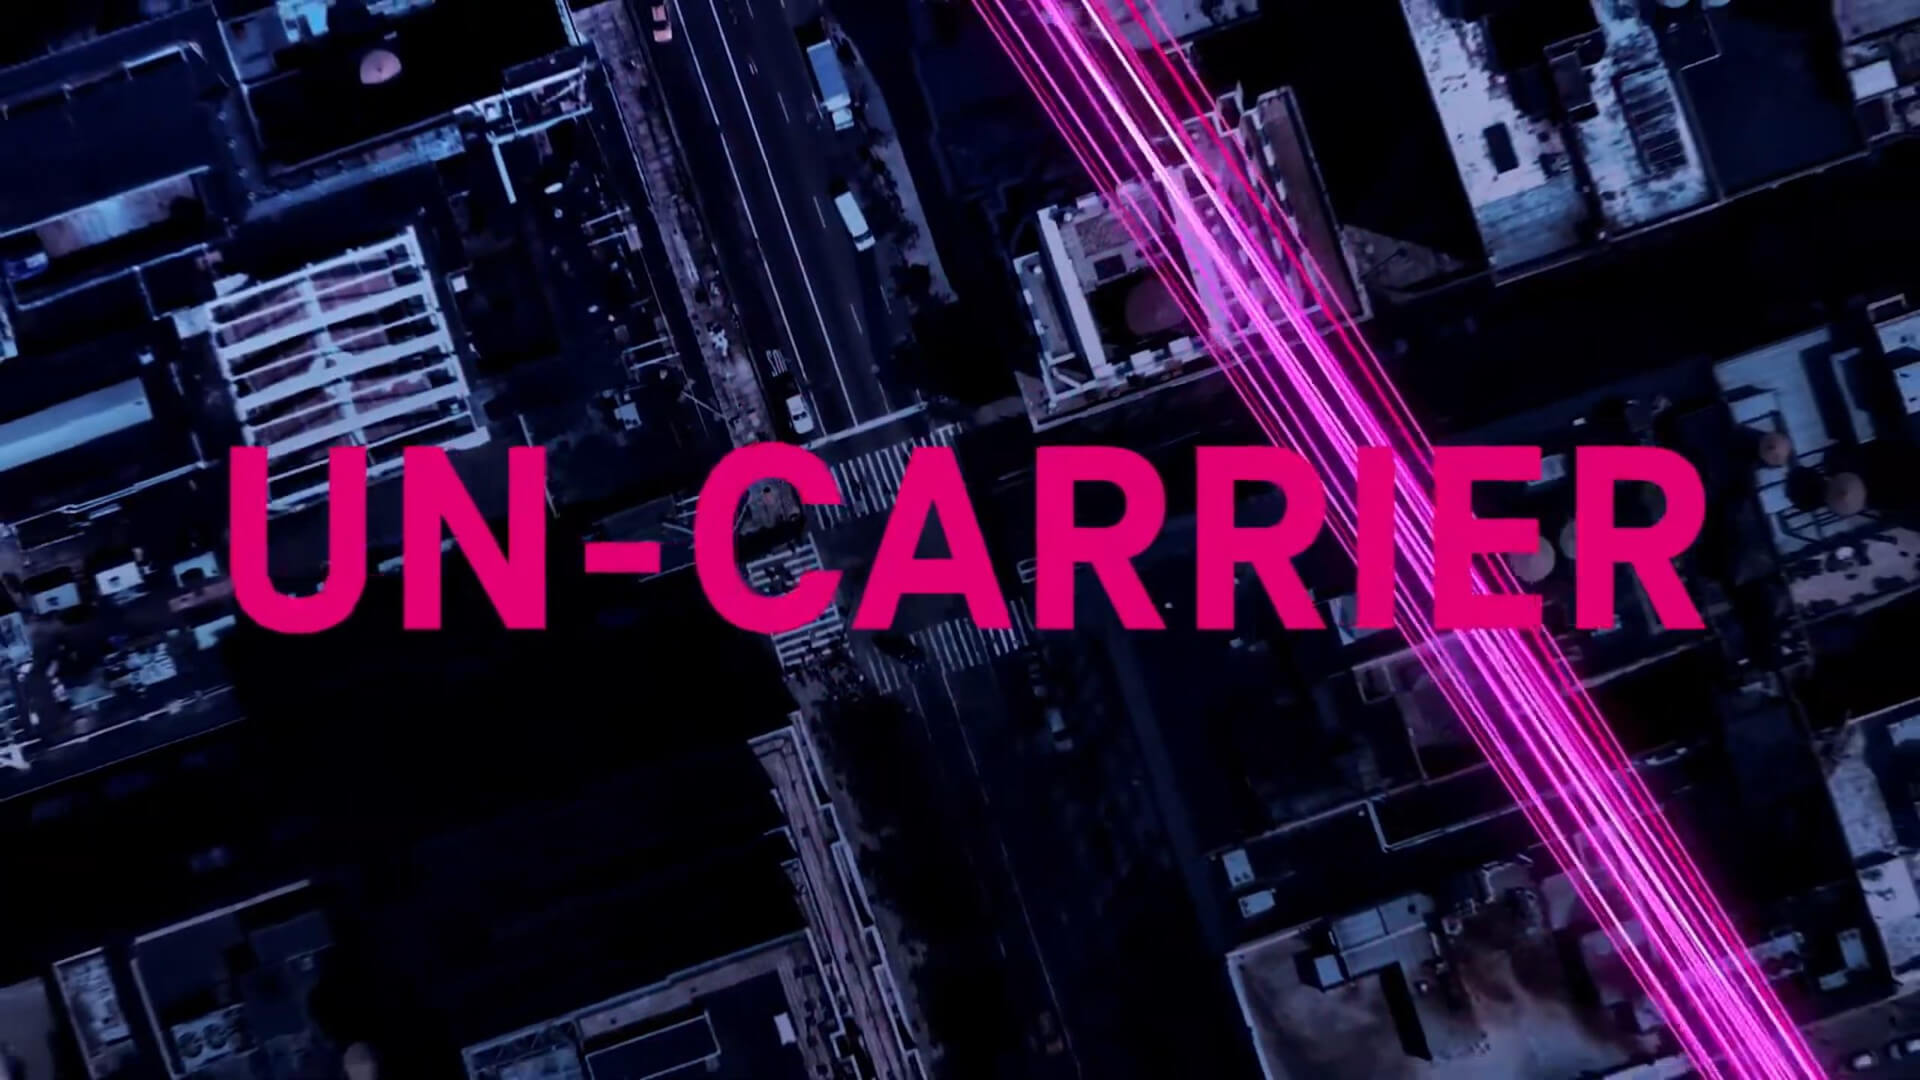 A shot from a T-Mobile trailer with the word "UNCARRIER" across it